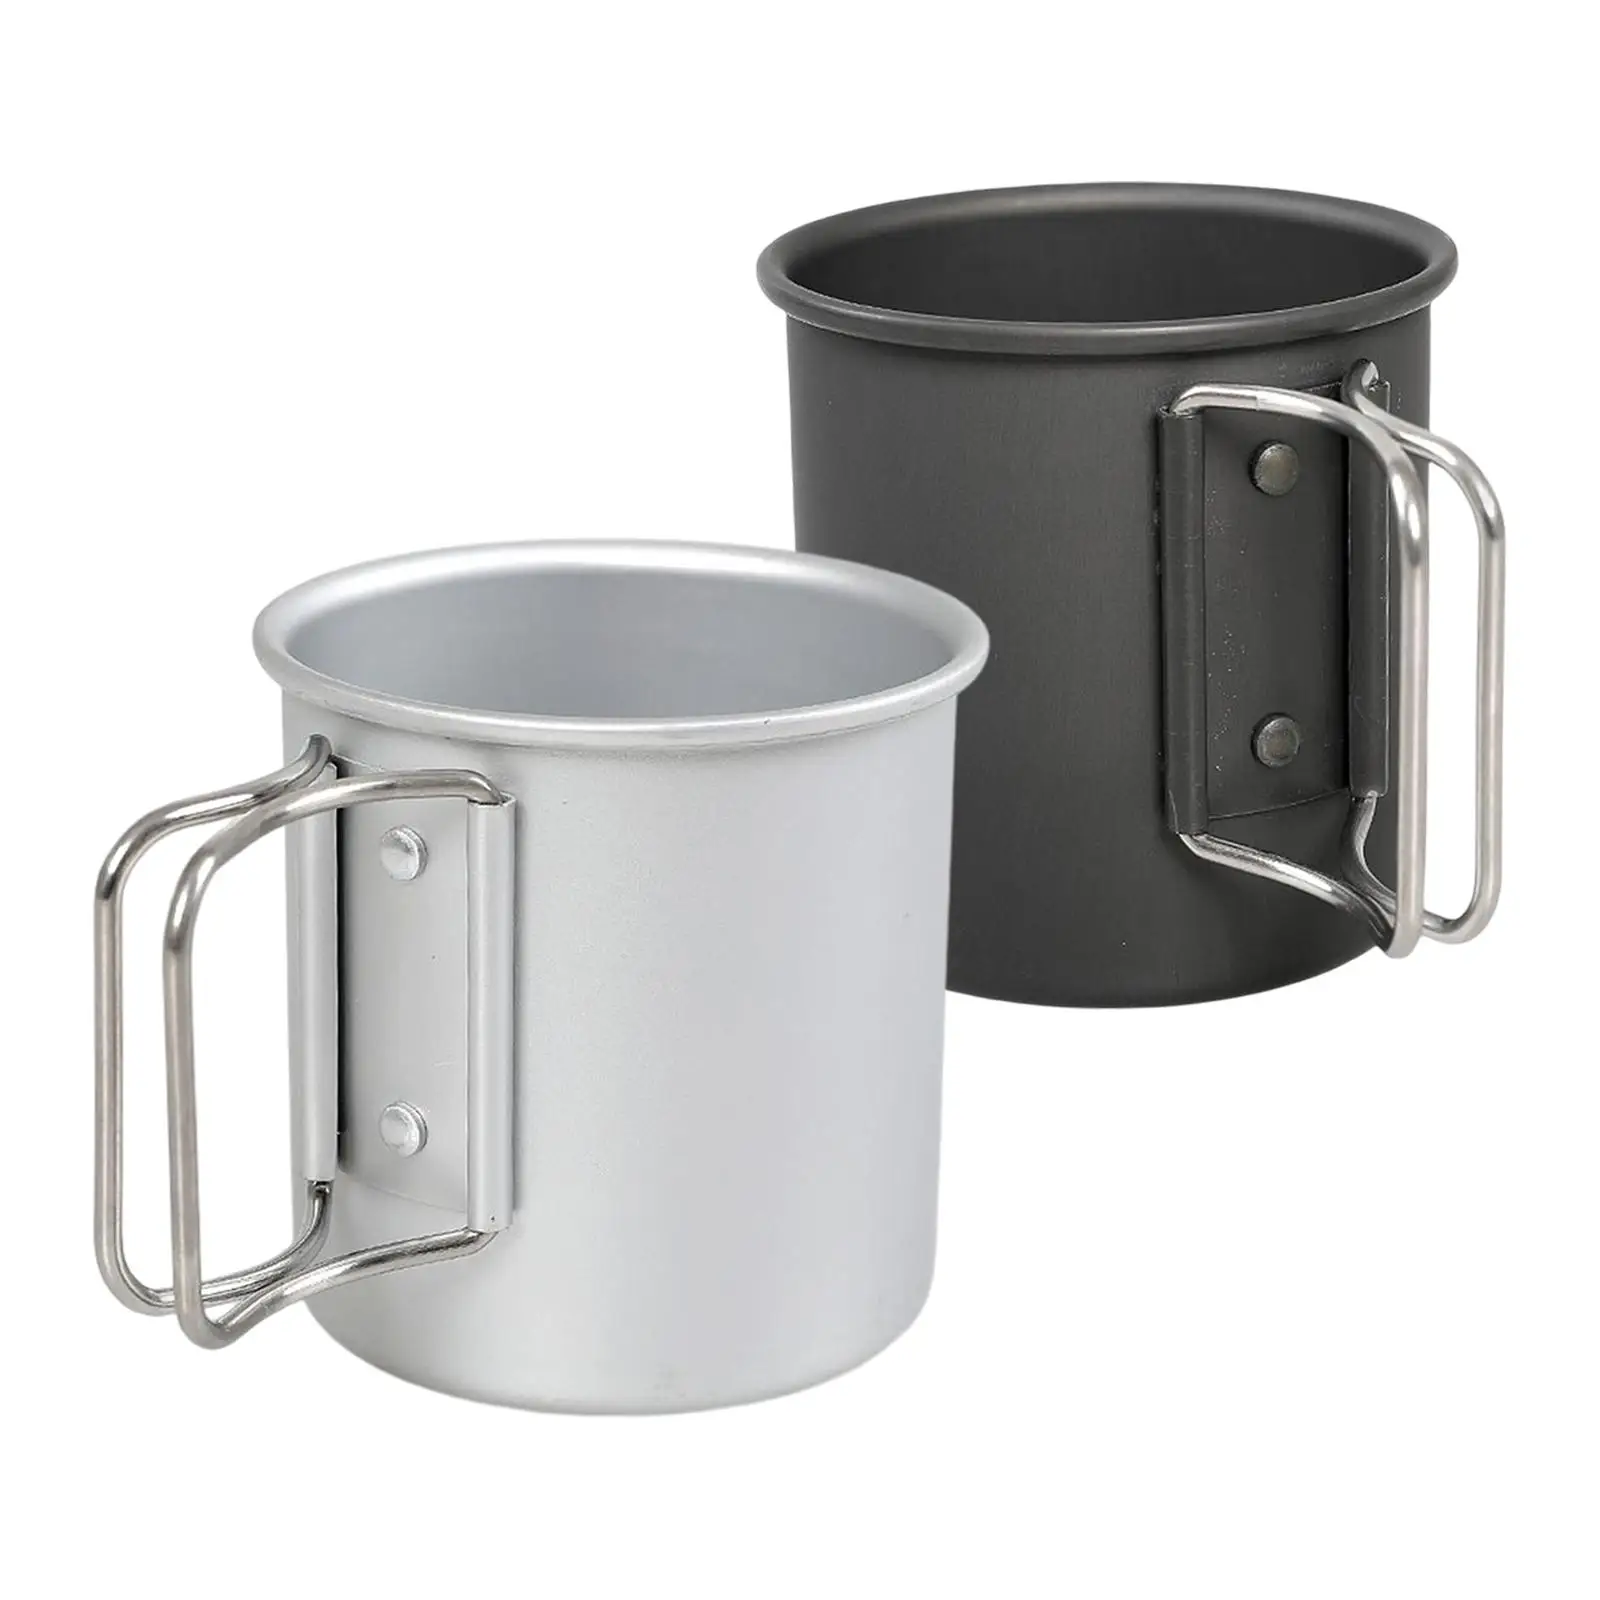 Alloy Outdoor Camping Cup with Collapsible Handle 0.3L Lightweight Easy to Use Water Cup for Backpacking Survival Fishing Hiking